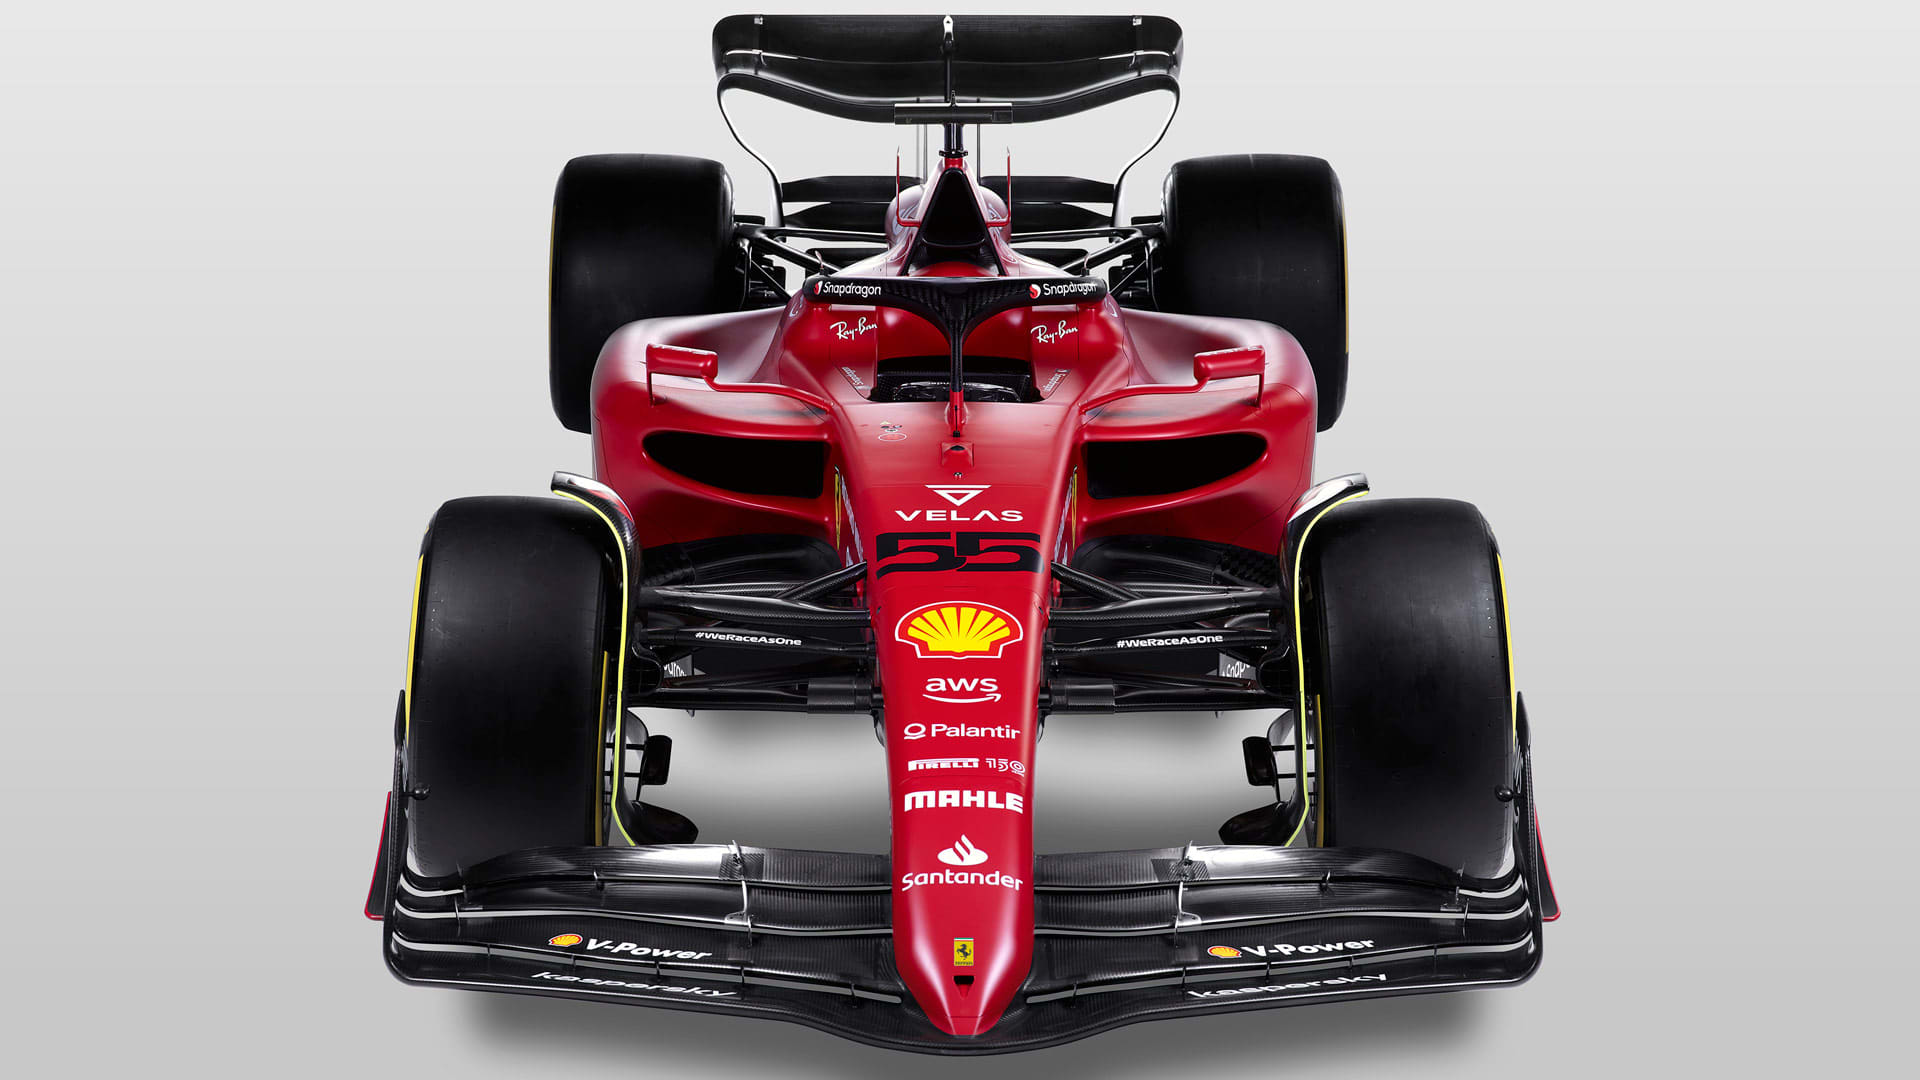 ANALYSIS Ferrari sidepods hint at unique direction for their 2022 F1-75 Formula 1®